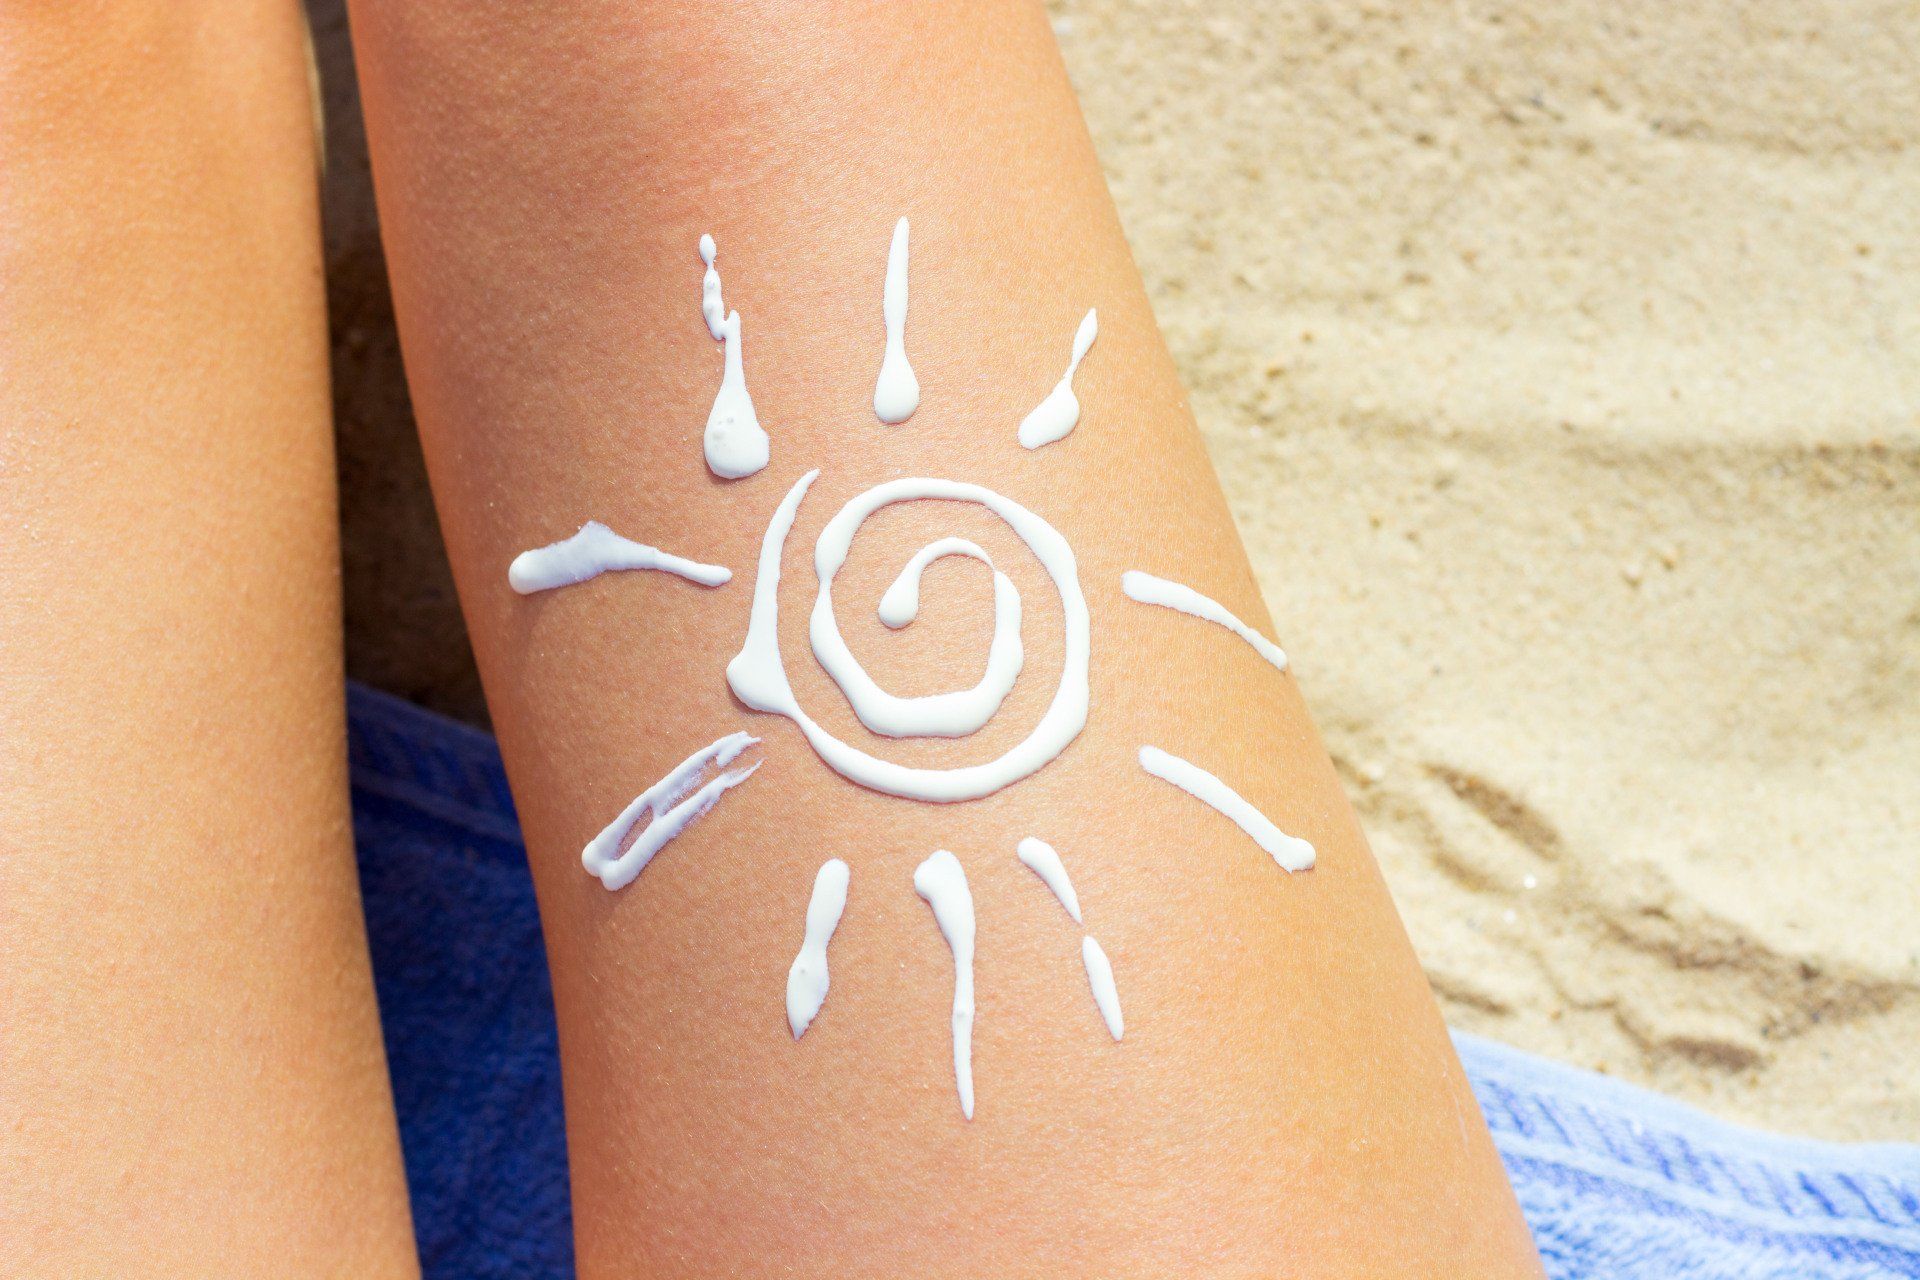 Tan leg with a sun drawn with lotion on it